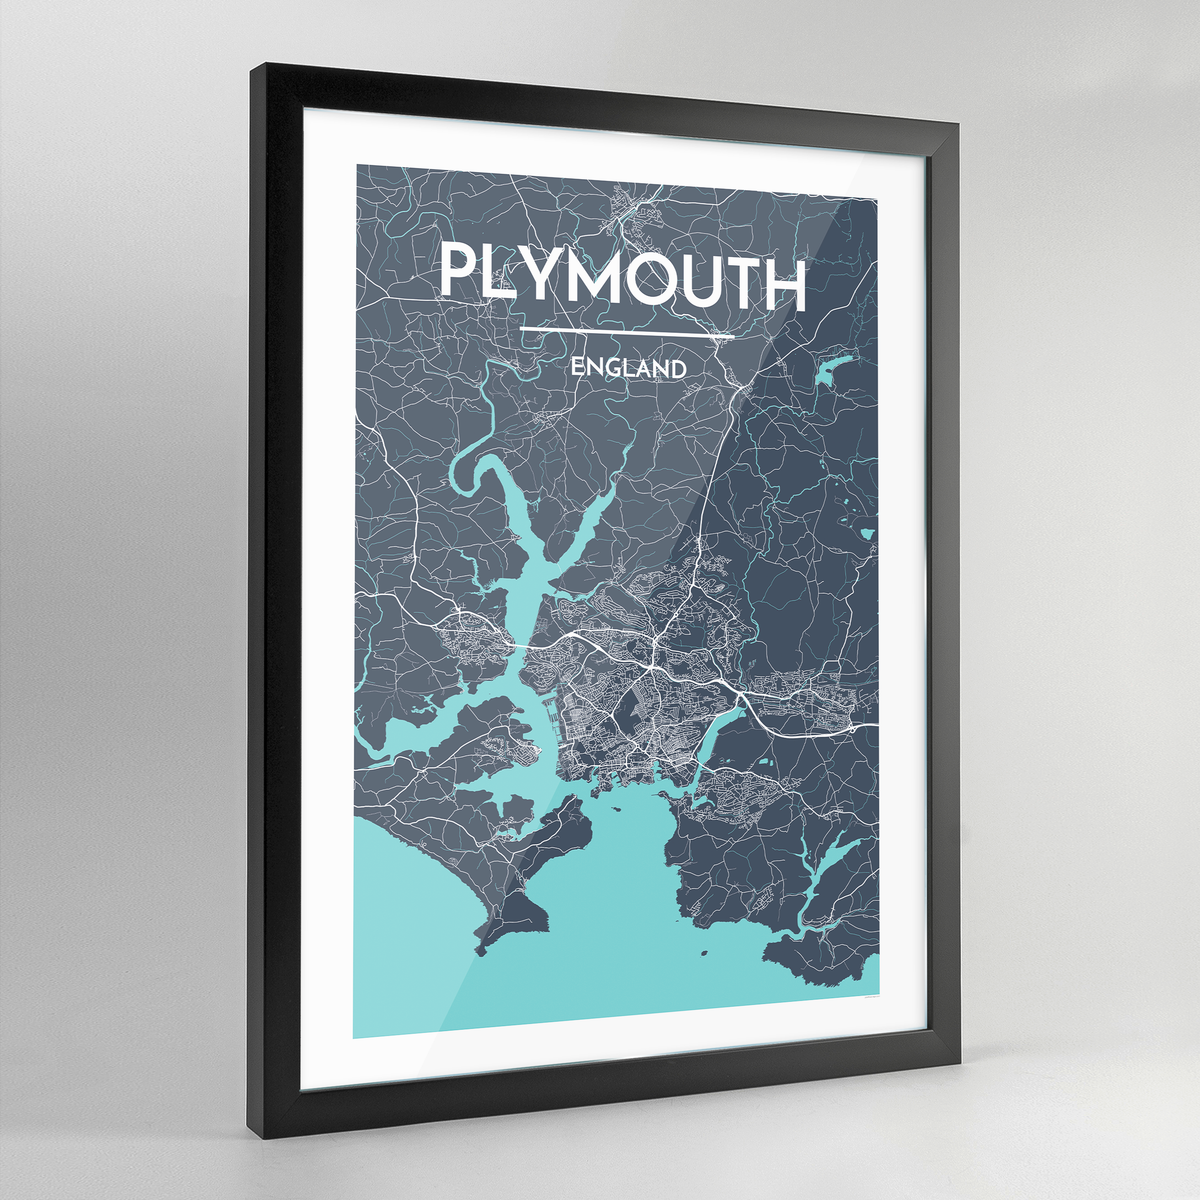 Framed Plymouth City Map Art Print - Point Two Design